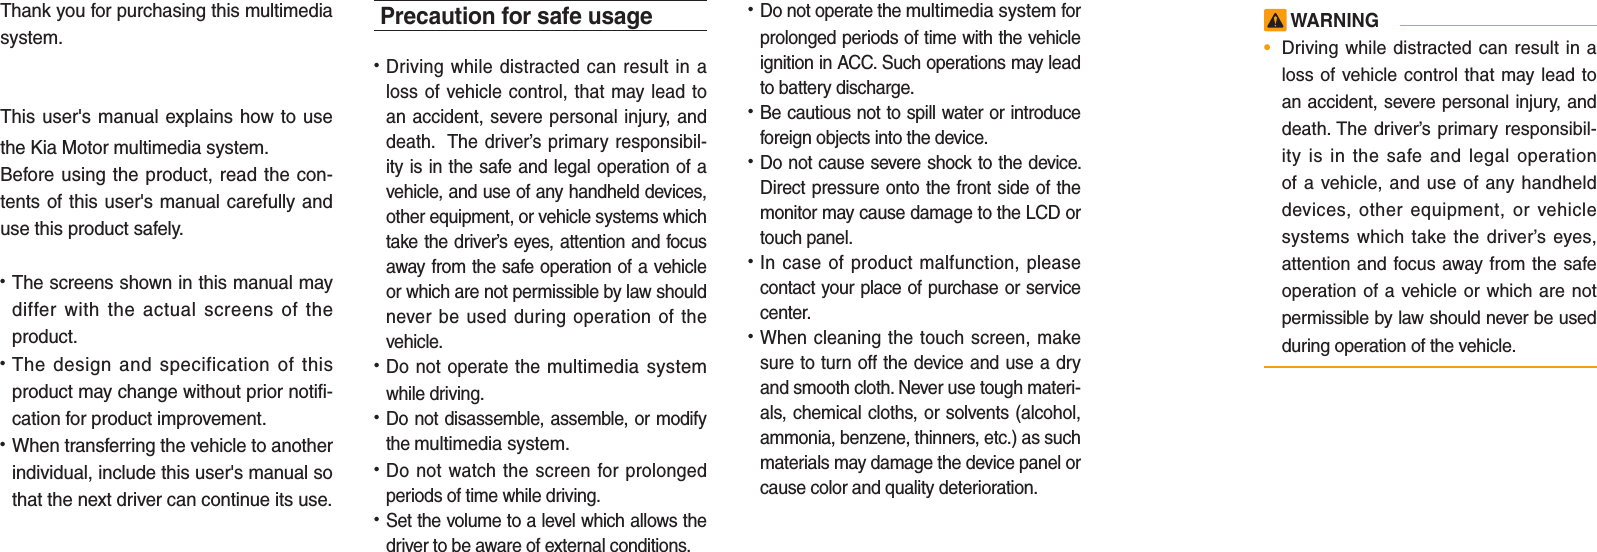 Thank you for purchasing this multimedia system.This user&apos;s manual explains how to use the Kia Motor multimedia system.Before using the product, read the con-tents of this user&apos;s manual carefully and use this product safely.• The screens shown in this manual may differ with the actual screens of the product.• The design and specification of this product may change without prior notifi-cation for product improvement.• When transferring the vehicle to another individual, include this user&apos;s manual so that the next driver can continue its use.Precaution for safe usage•   Driving while distracted can result in a loss of vehicle control, that may lead to an accident, severe personal injury, and death.  The driver’s primary responsibil-ity is in the safe and legal operation of a vehicle, and use of any handheld devices, other equipment, or vehicle systems which take the driver’s eyes, attention and focus away from the safe operation of a vehicle or which are not permissible by law should never be used during operation of the vehicle.• Do not operate the multimedia system while driving. • Do not disassemble, assemble, or modify the multimedia system.•  Do not watch the screen for prolonged periods of time while driving. •  Set the volume to a level which allows the driver to be aware of external conditions.  •  Do not operate the multimedia system for prolonged periods of time with the vehicle ignition in ACC. Such operations may lead to battery discharge.• Be cautious not to spill water or introduce foreign objects into the device.• Do not cause severe shock to the device. Direct pressure onto the front side of the monitor may cause damage to the LCD or touch panel. • In case of product malfunction, please contact your place of purchase or service center.• When cleaning the touch screen, make sure to turn off the device and use a dry and smooth cloth. Never use tough materi-als, chemical cloths, or solvents (alcohol, ammonia, benzene, thinners, etc.) as such materials may damage the device panel or cause color and quality deterioration.  WARNING•  Driving while distracted can result in a loss of vehicle control that may lead to an accident, severe personal injury, and death. The driver’s primary responsibil-ity is in the safe and legal operation of a vehicle, and use of any handheld devices, other equipment, or vehicle systems which take the driver’s eyes, attention and focus away from the safe operation of a vehicle or which are not permissible by law should never be used during operation of the vehicle.